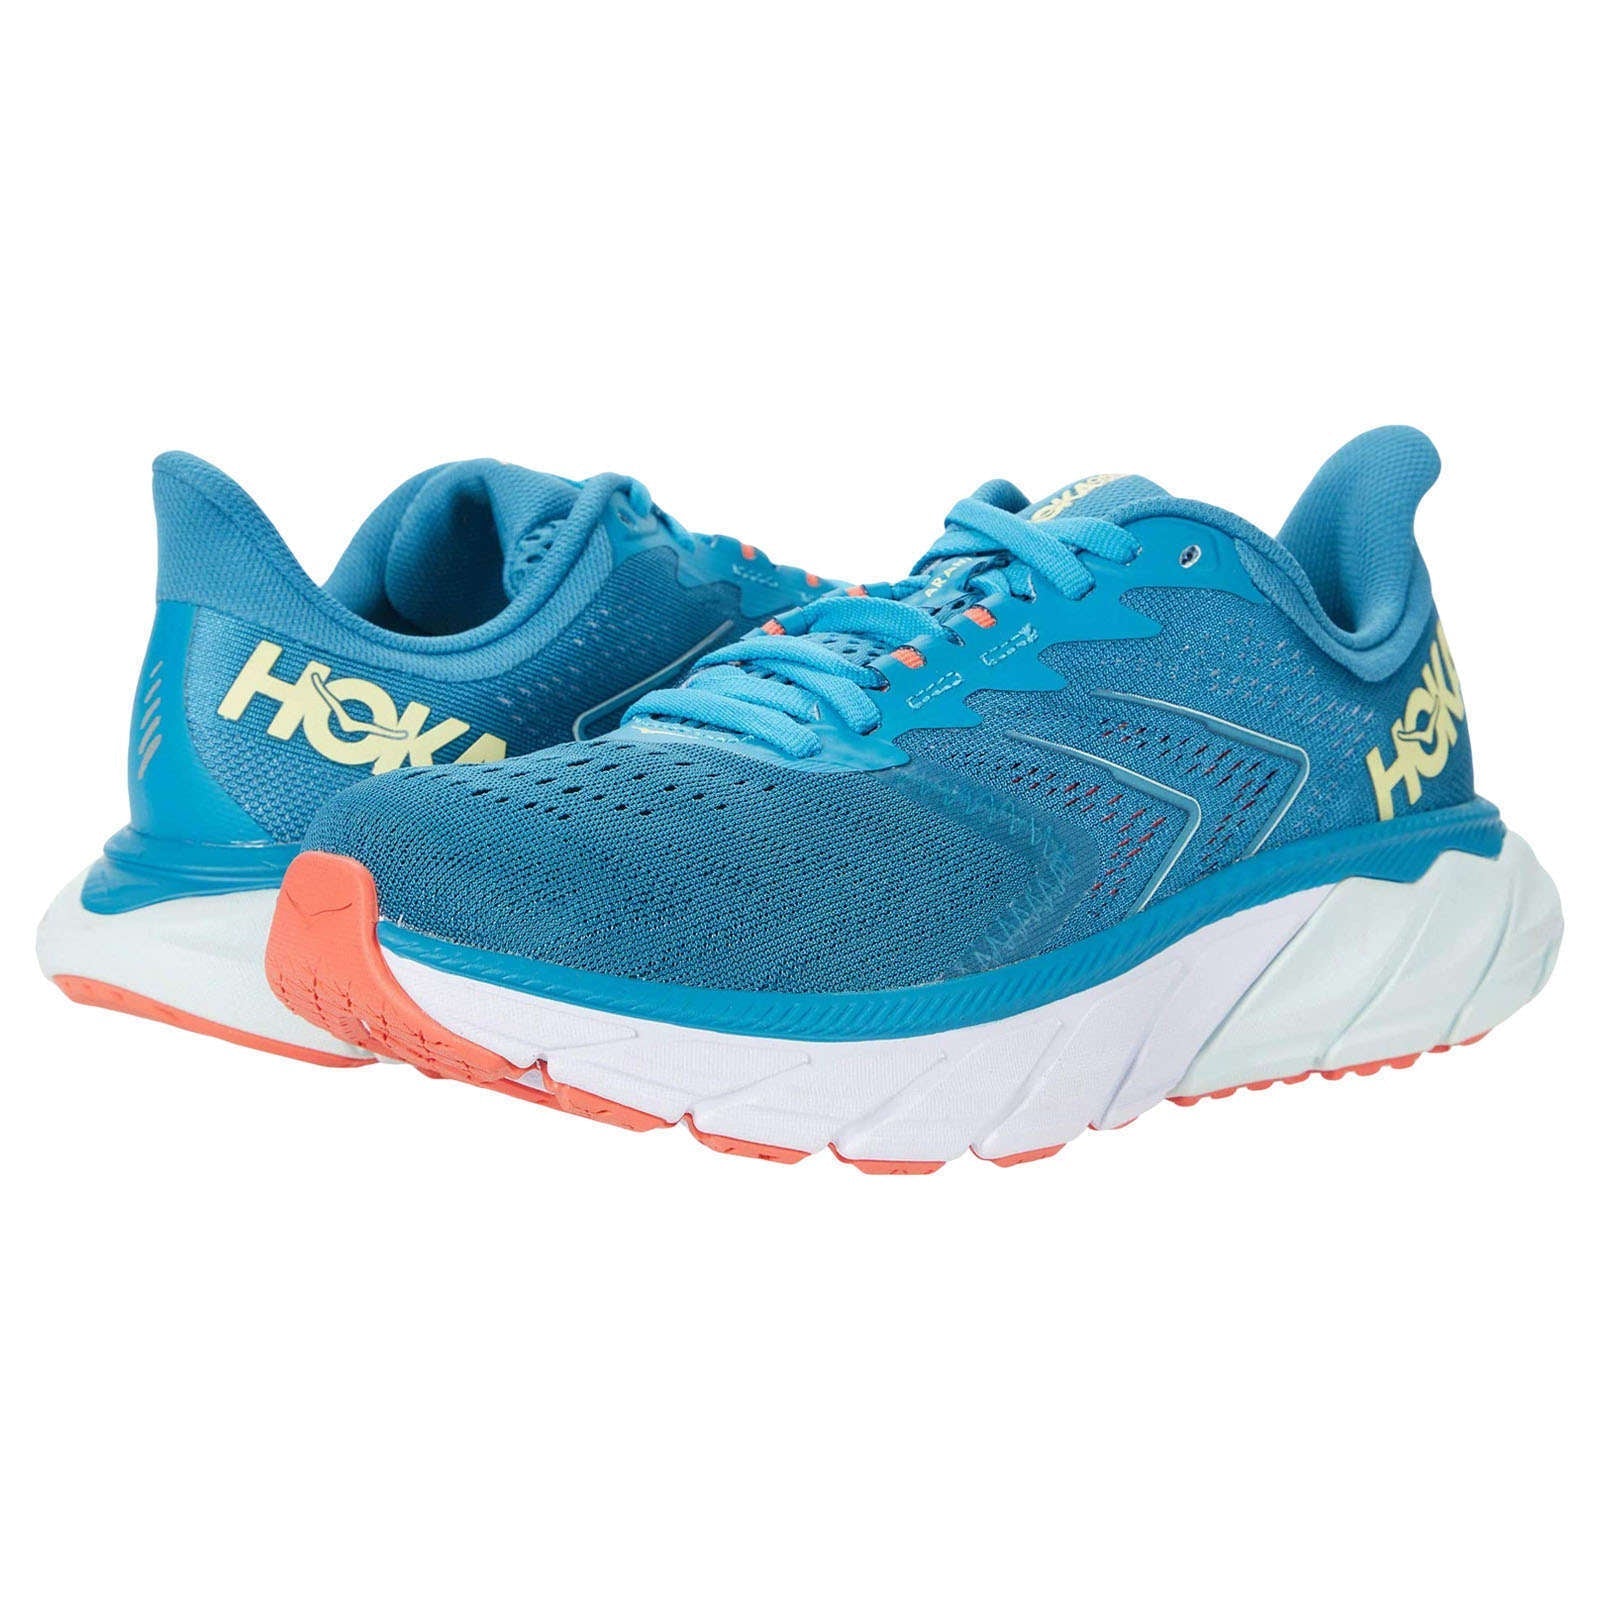 Hoka One One Arahi 5 Synthetic Textile Women's Low-Top Road Running Sneakers#color_mosaic blue luminary green